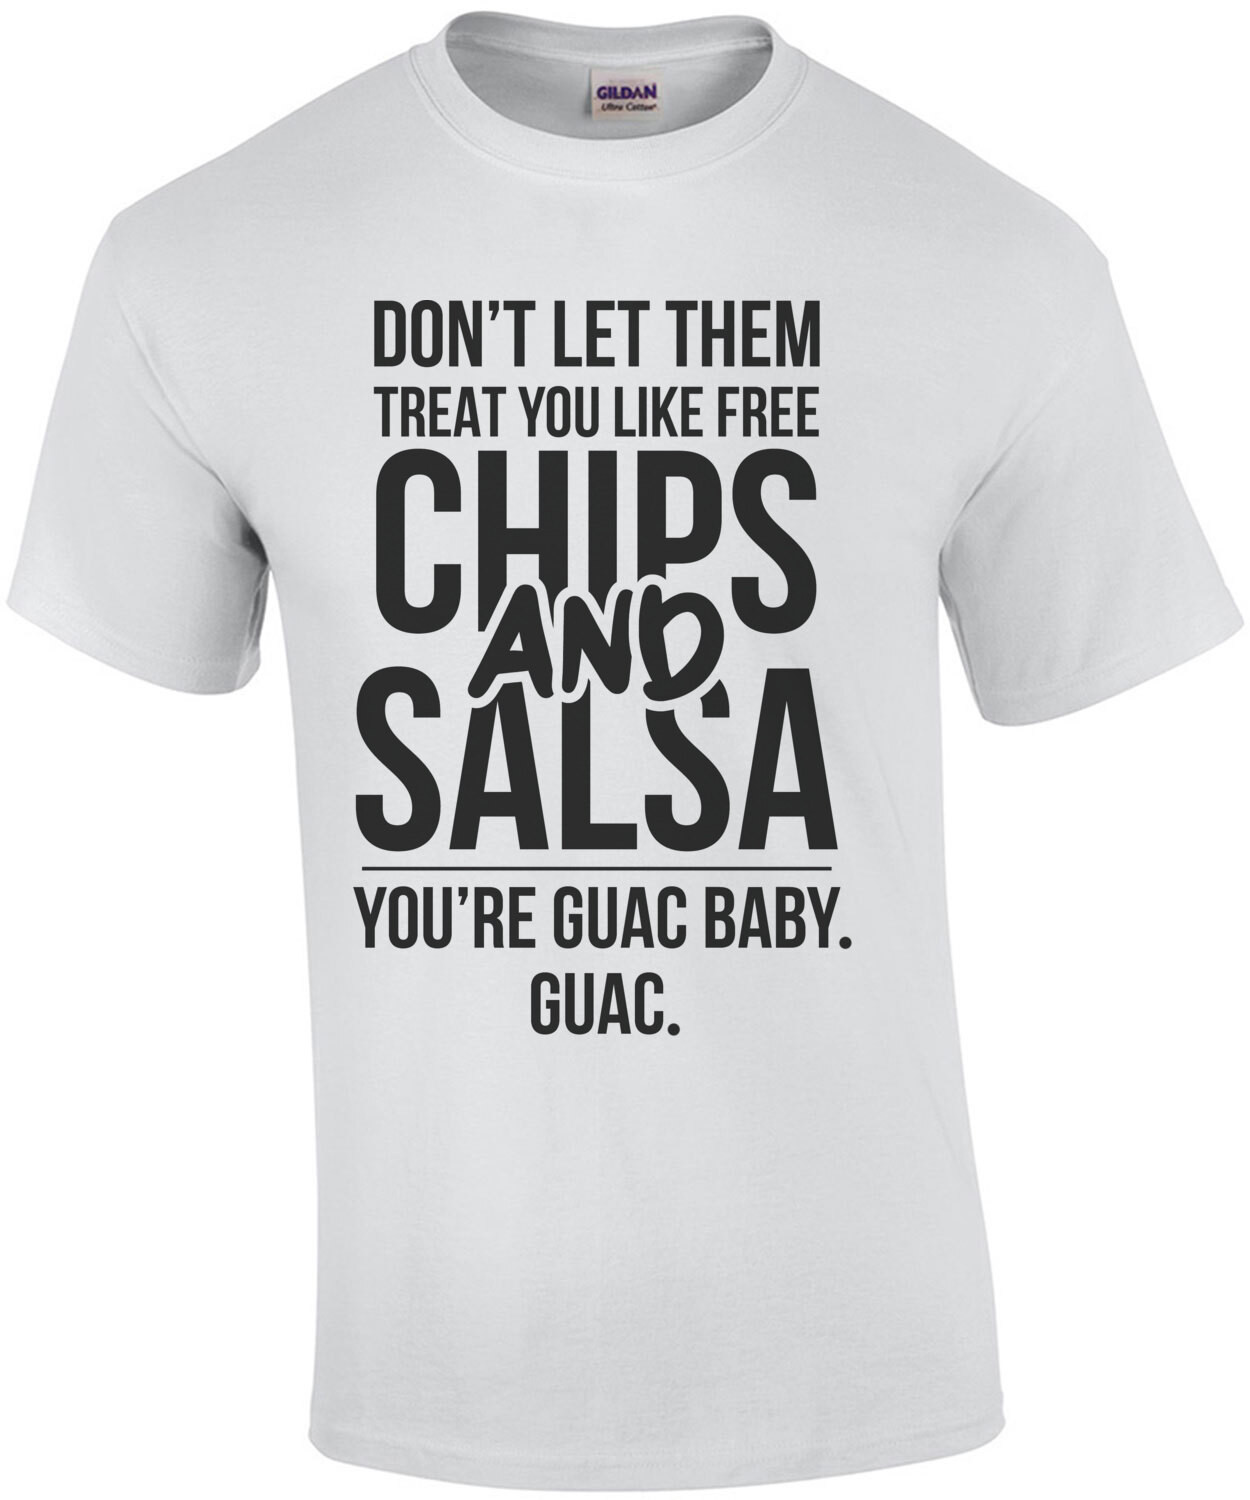 Don't let them treat you like free chips and salsa - you're guac baby. guac. funny t-shirt